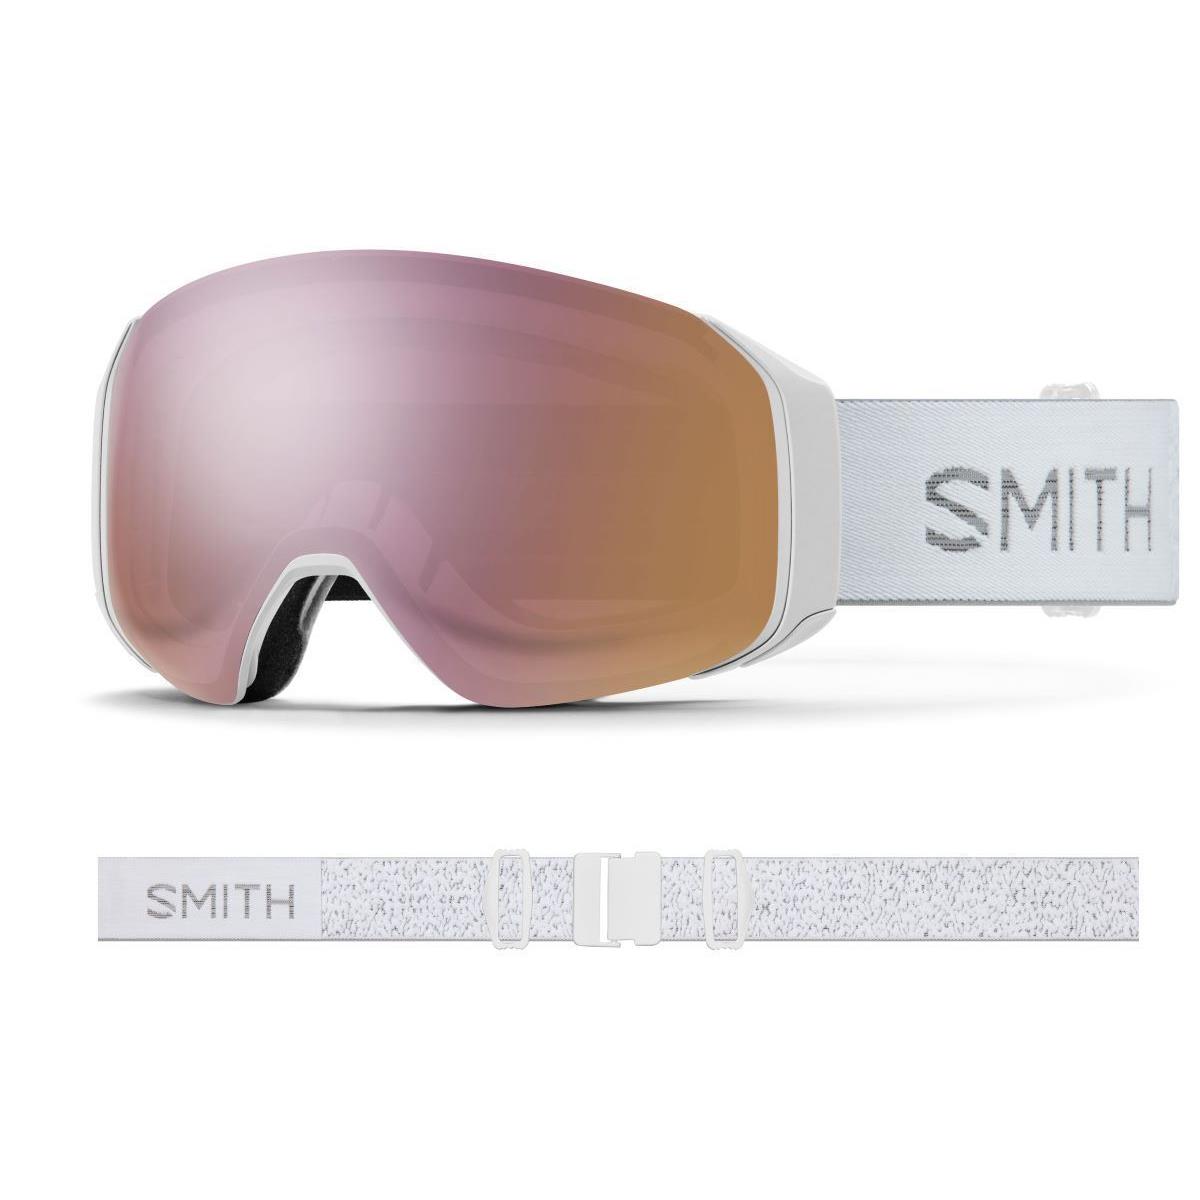 Smith 4D Mag S Ski Goggles 2 Premium Lenses Included Authorized Smith Dealer - Frame: See Menu Options, Lens: See Menu Options